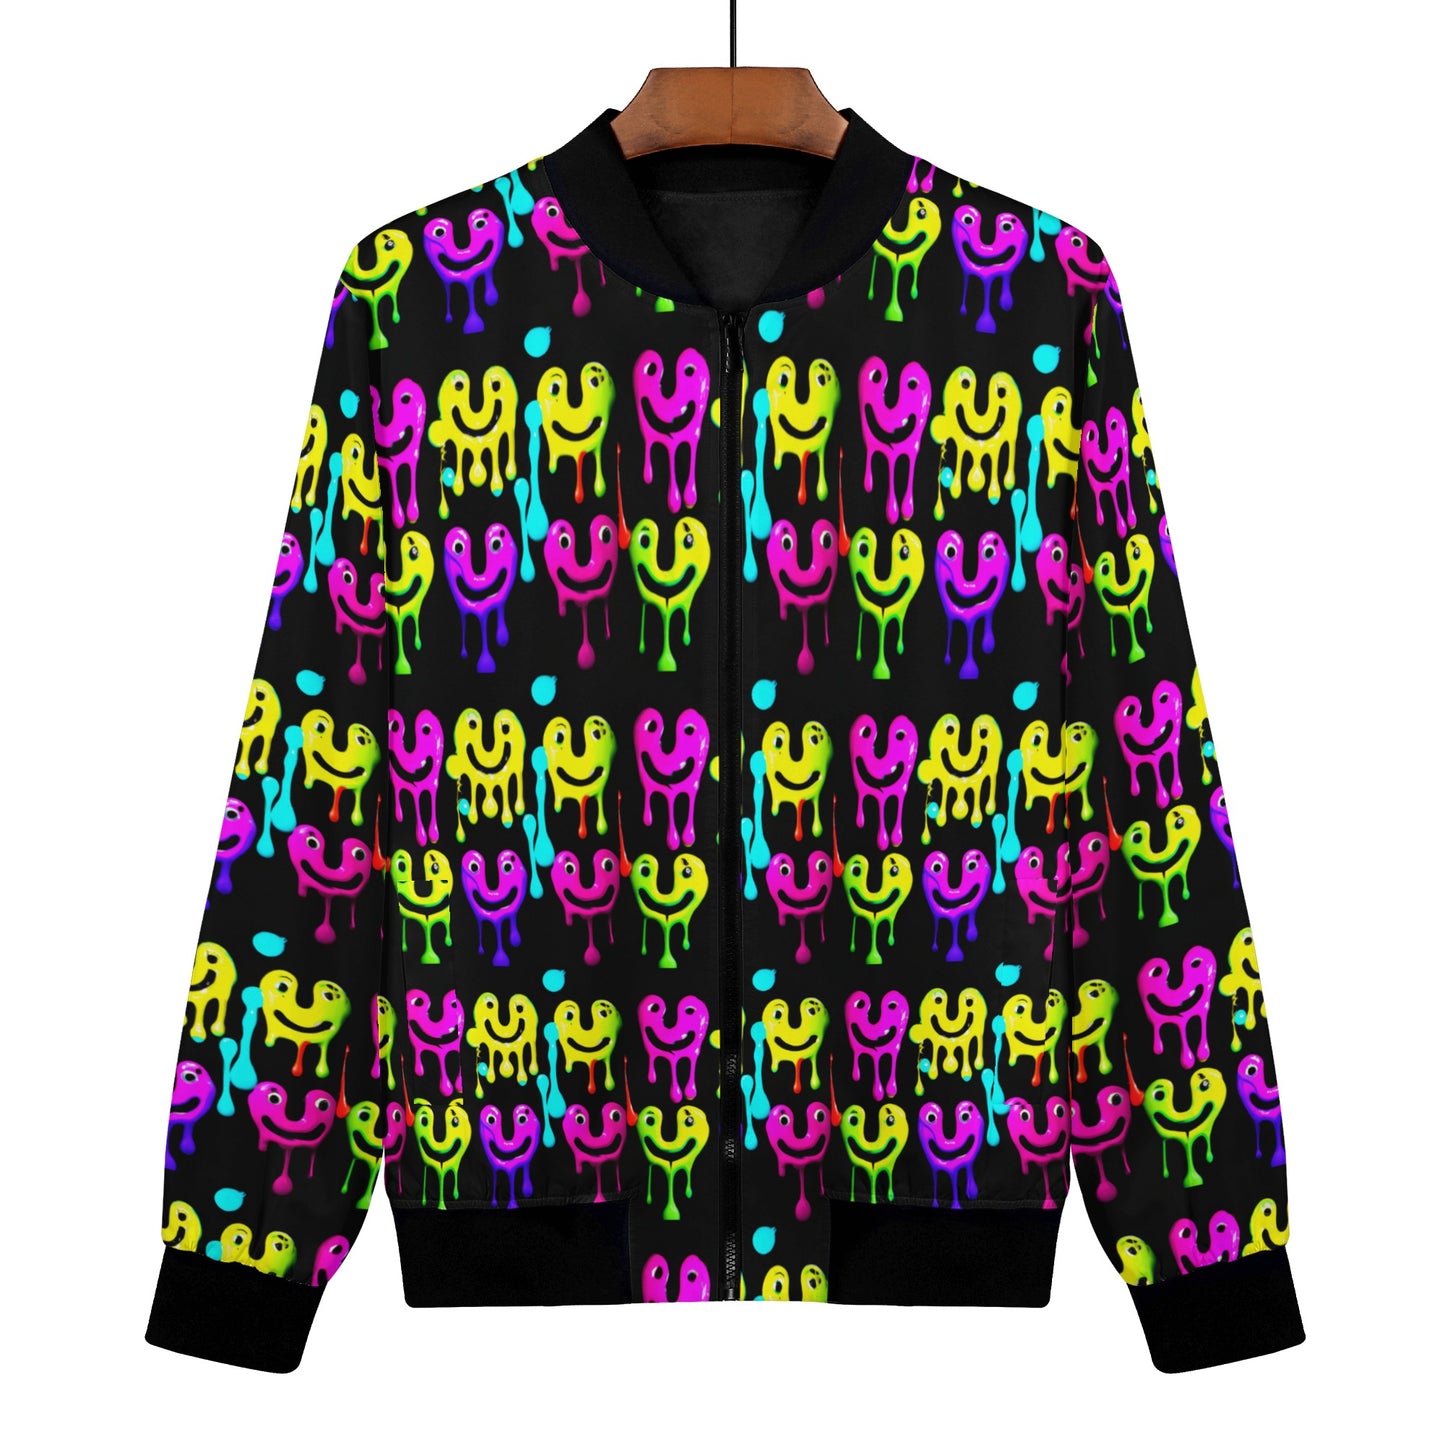 This women's bomber jacket has an all over digitally printed vibrant design.  This jacket is interesting and super cool.  Featuring the unique and super bright style of spray-painted smiley faces dripping over the entire garment.  